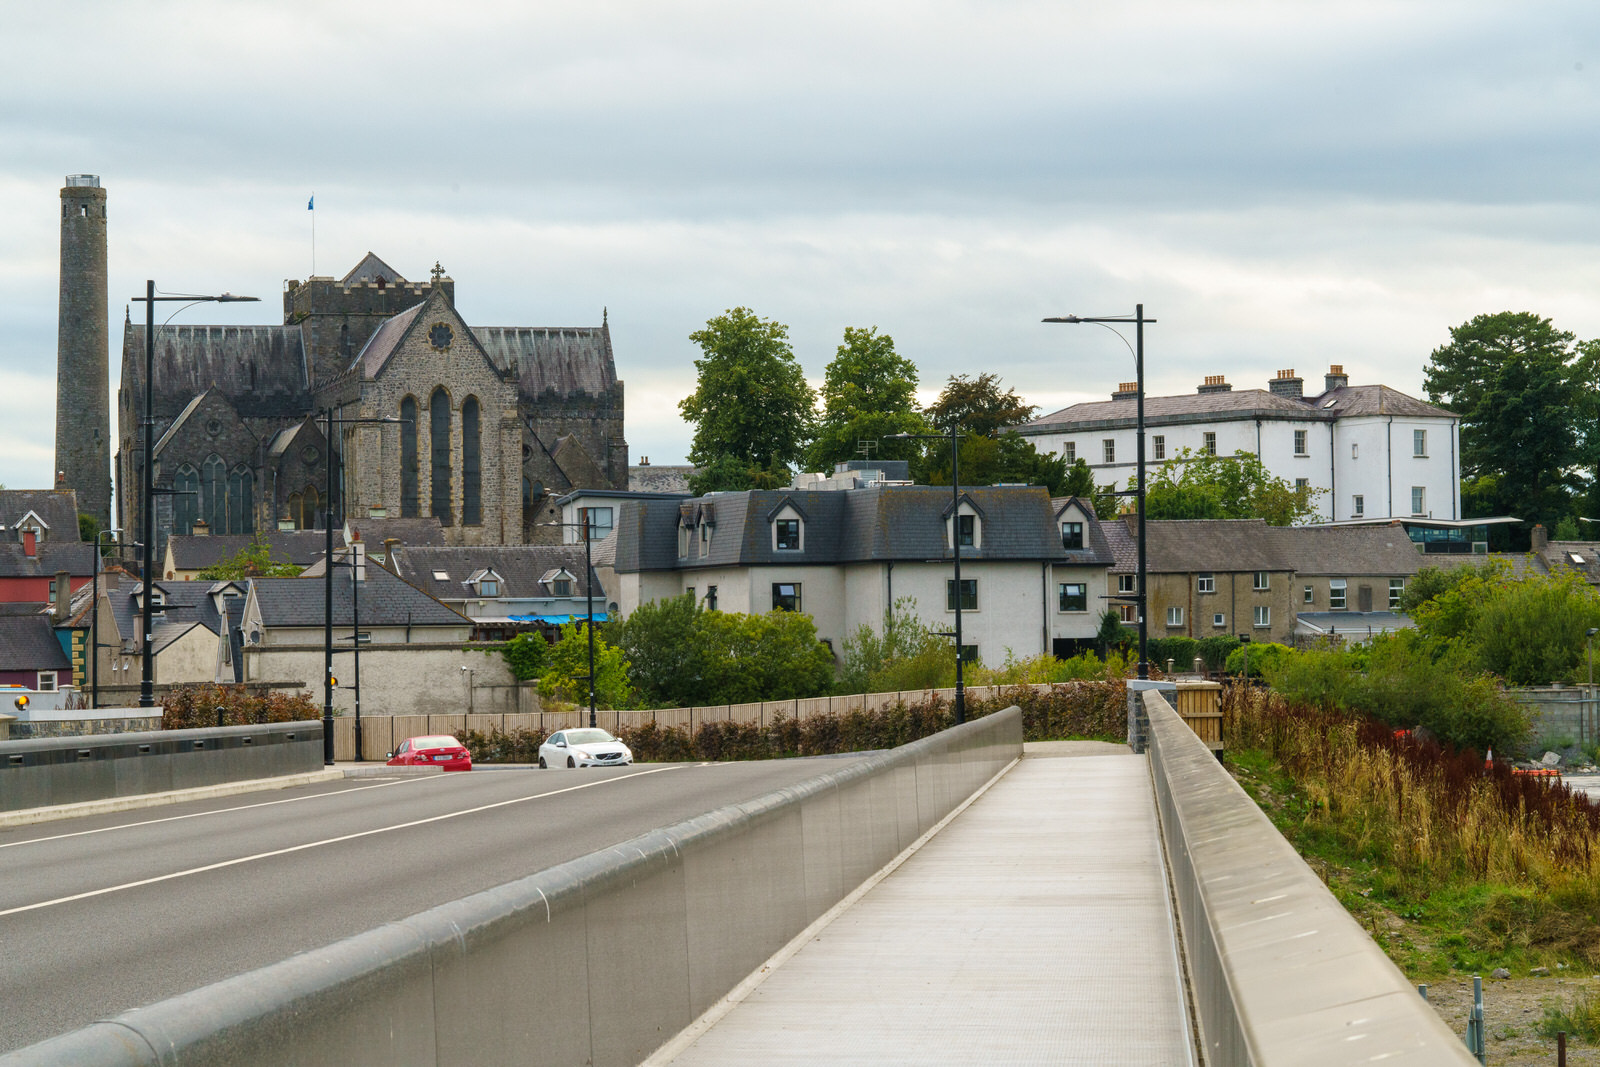 THE NEW ST FRANCIS BRIDGE IN KILKENNY AND THE SURROUNDING AREA [OPENED TO THE PUBLIC IN 2017]-227046-1